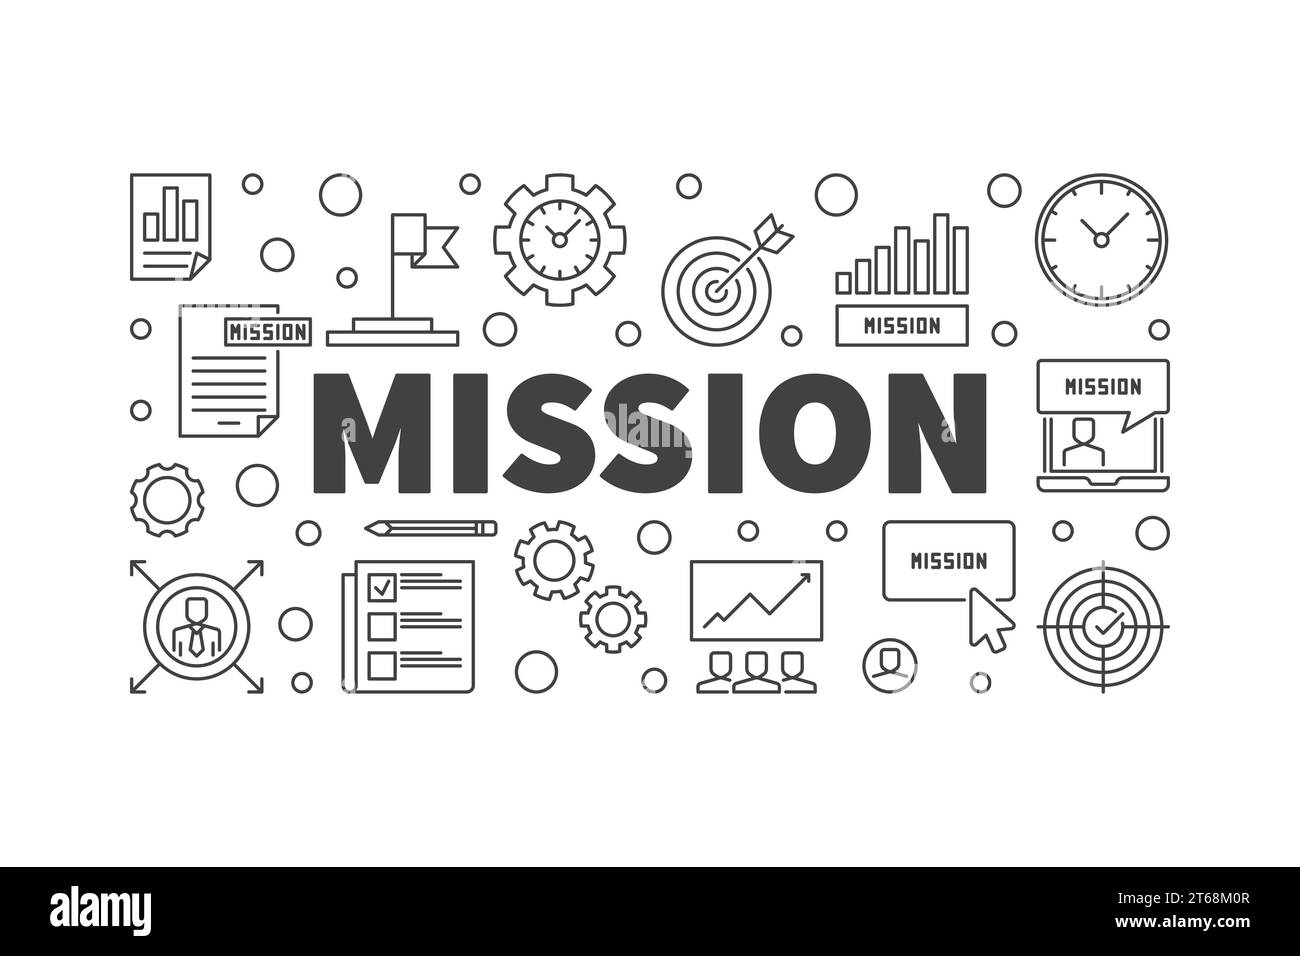 Mission vector horizontal banner or illustration in outline style Stock Vector